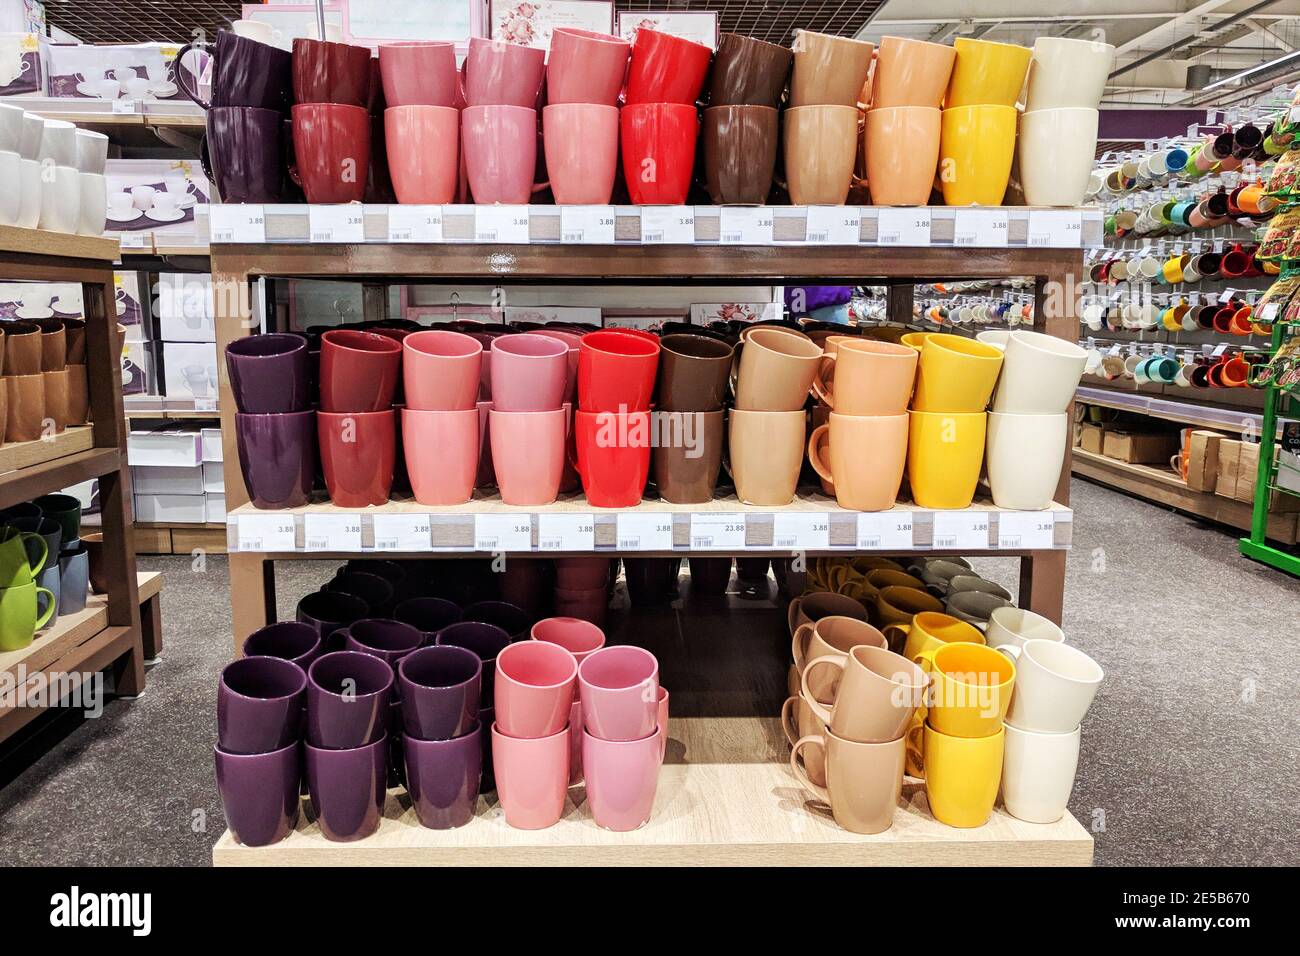 Сups are sold at the shop. Rows of different multi-colored cups for home on shelves in a supermarket. Stock Photo